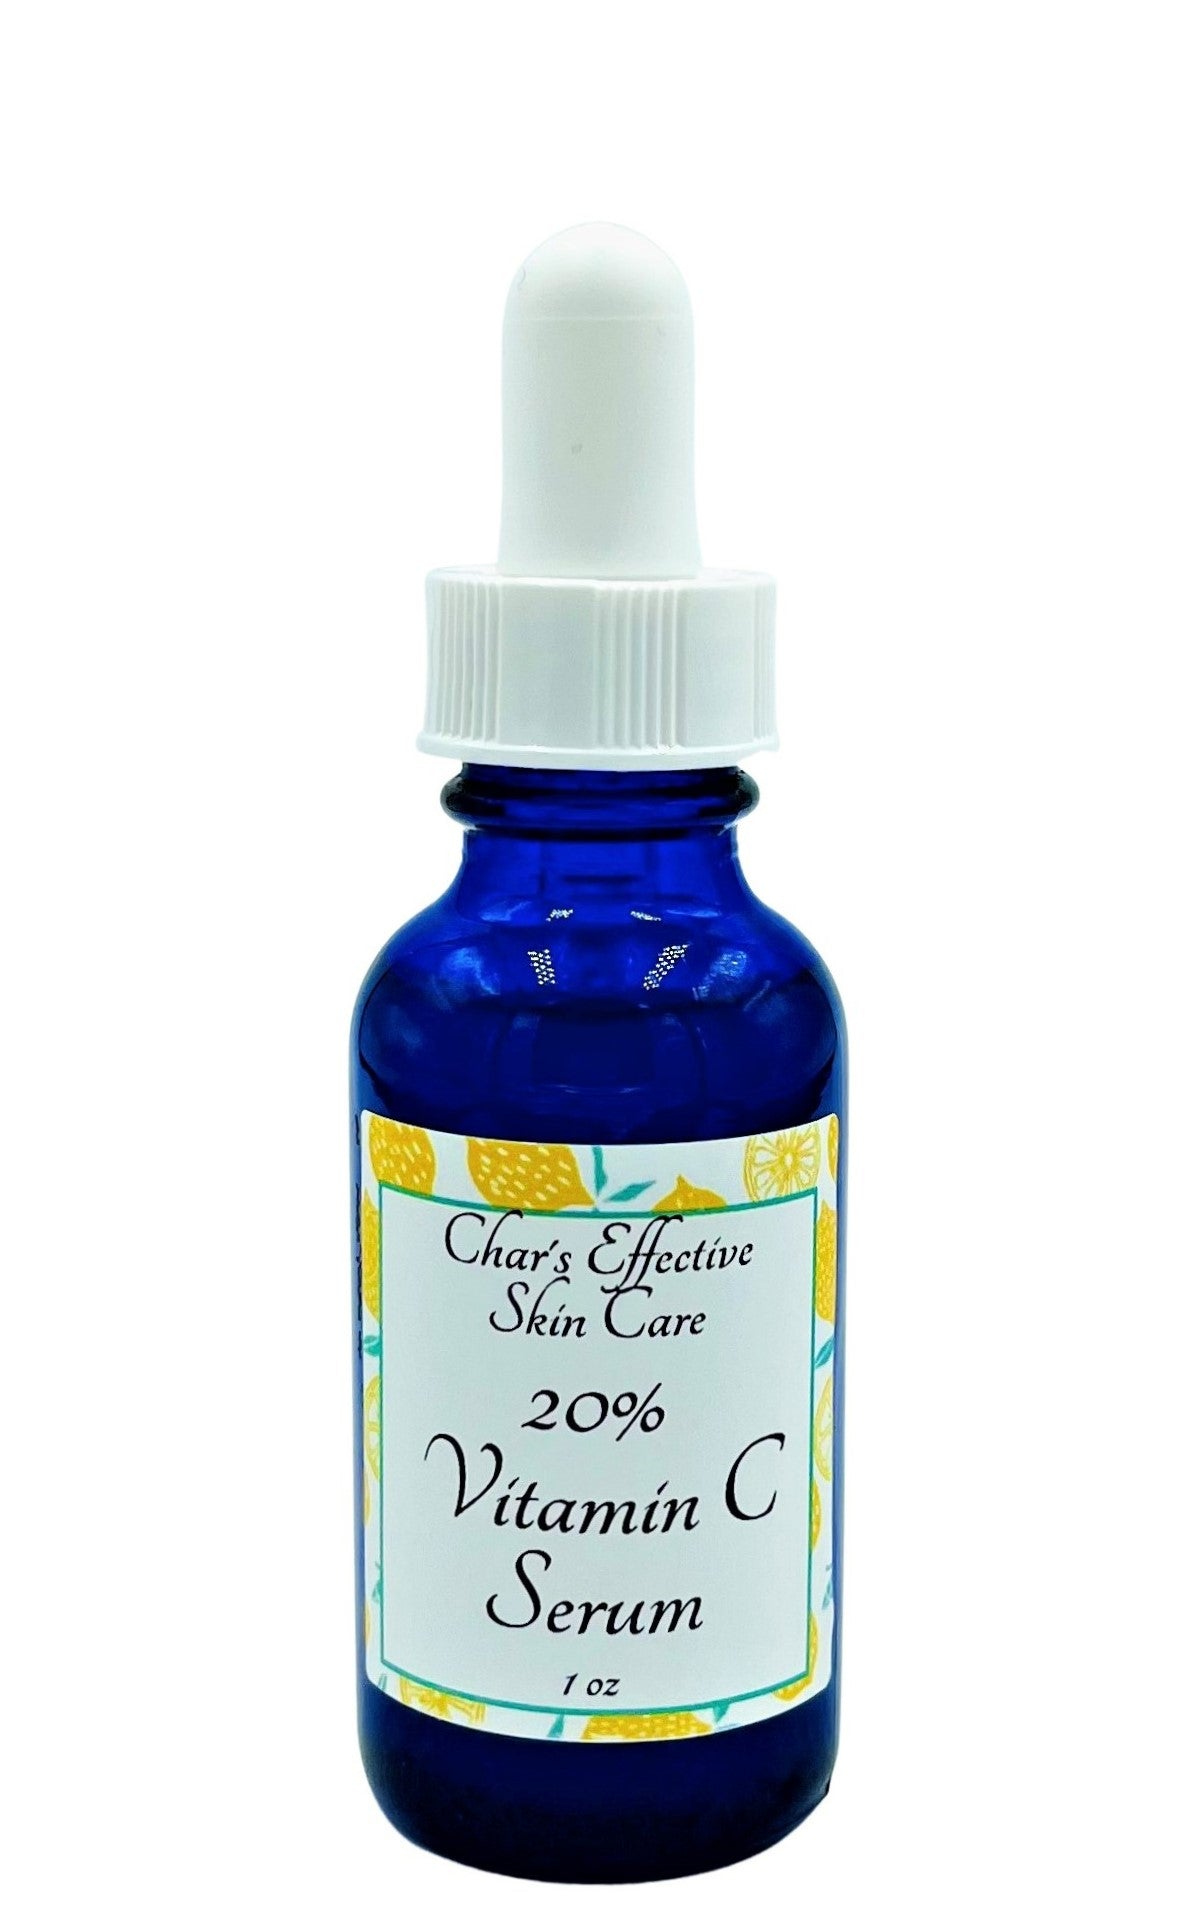 20% Vitamin C Serum with Ferulic Acid & Antioxidants/For anti aging and healthy skin care/1oz Blue Glass bottle with white dropper/ Char's Effectives